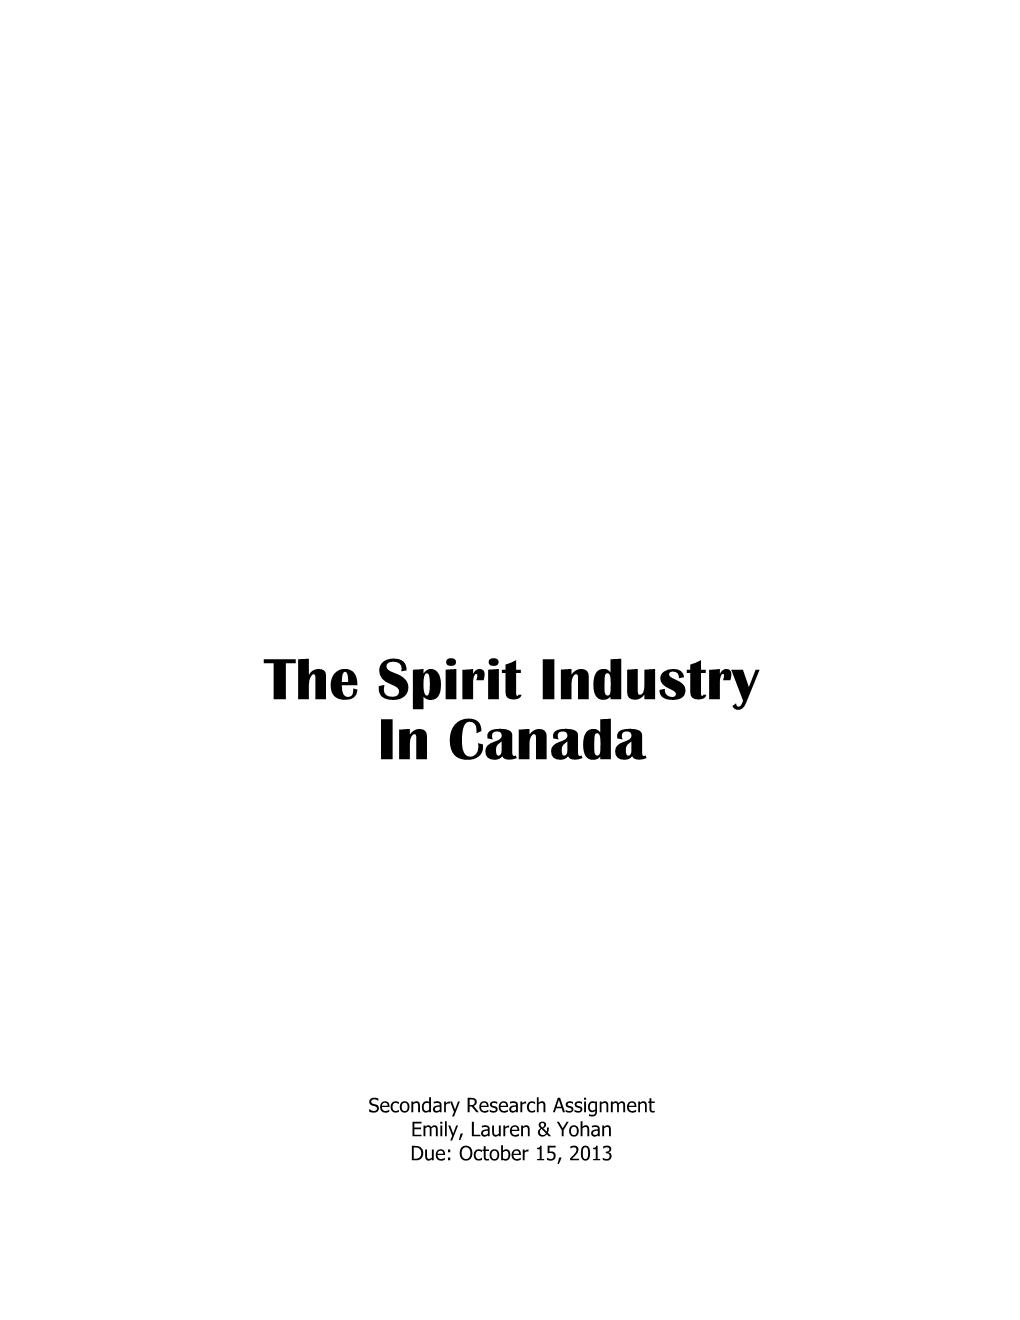 The Spirit Industry in Canada